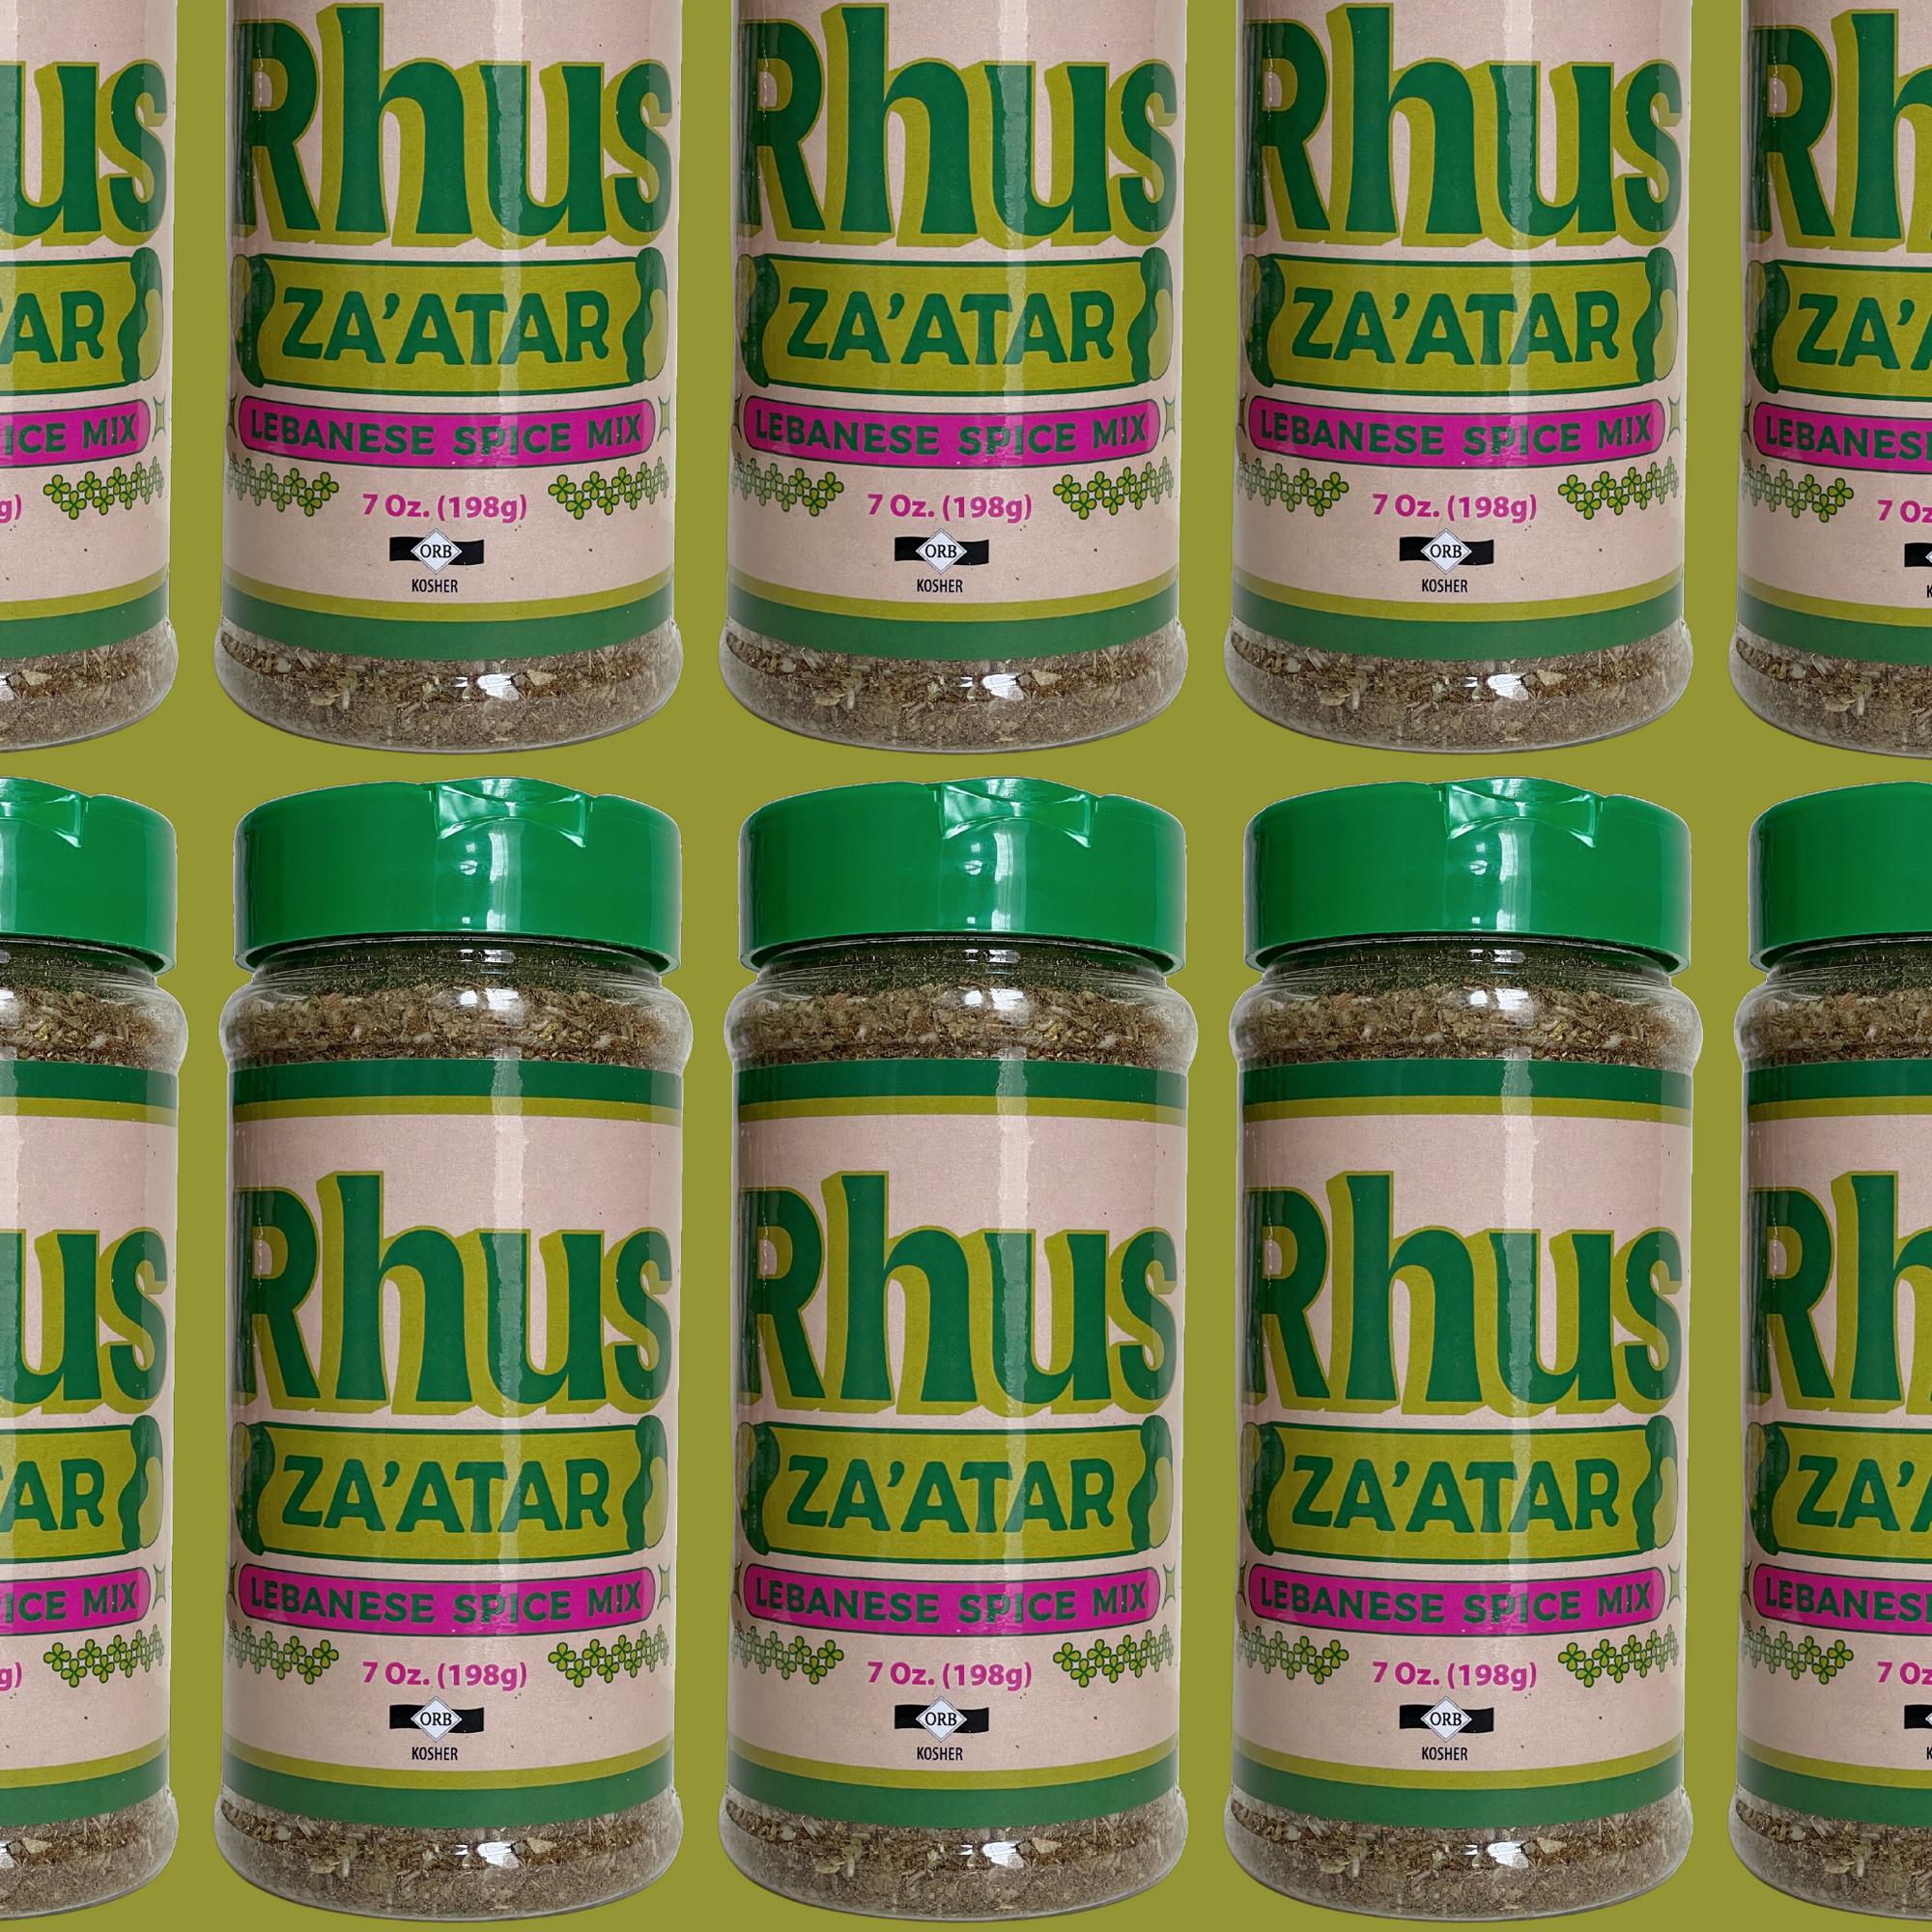 Repetitive pattern of za'atar canister.